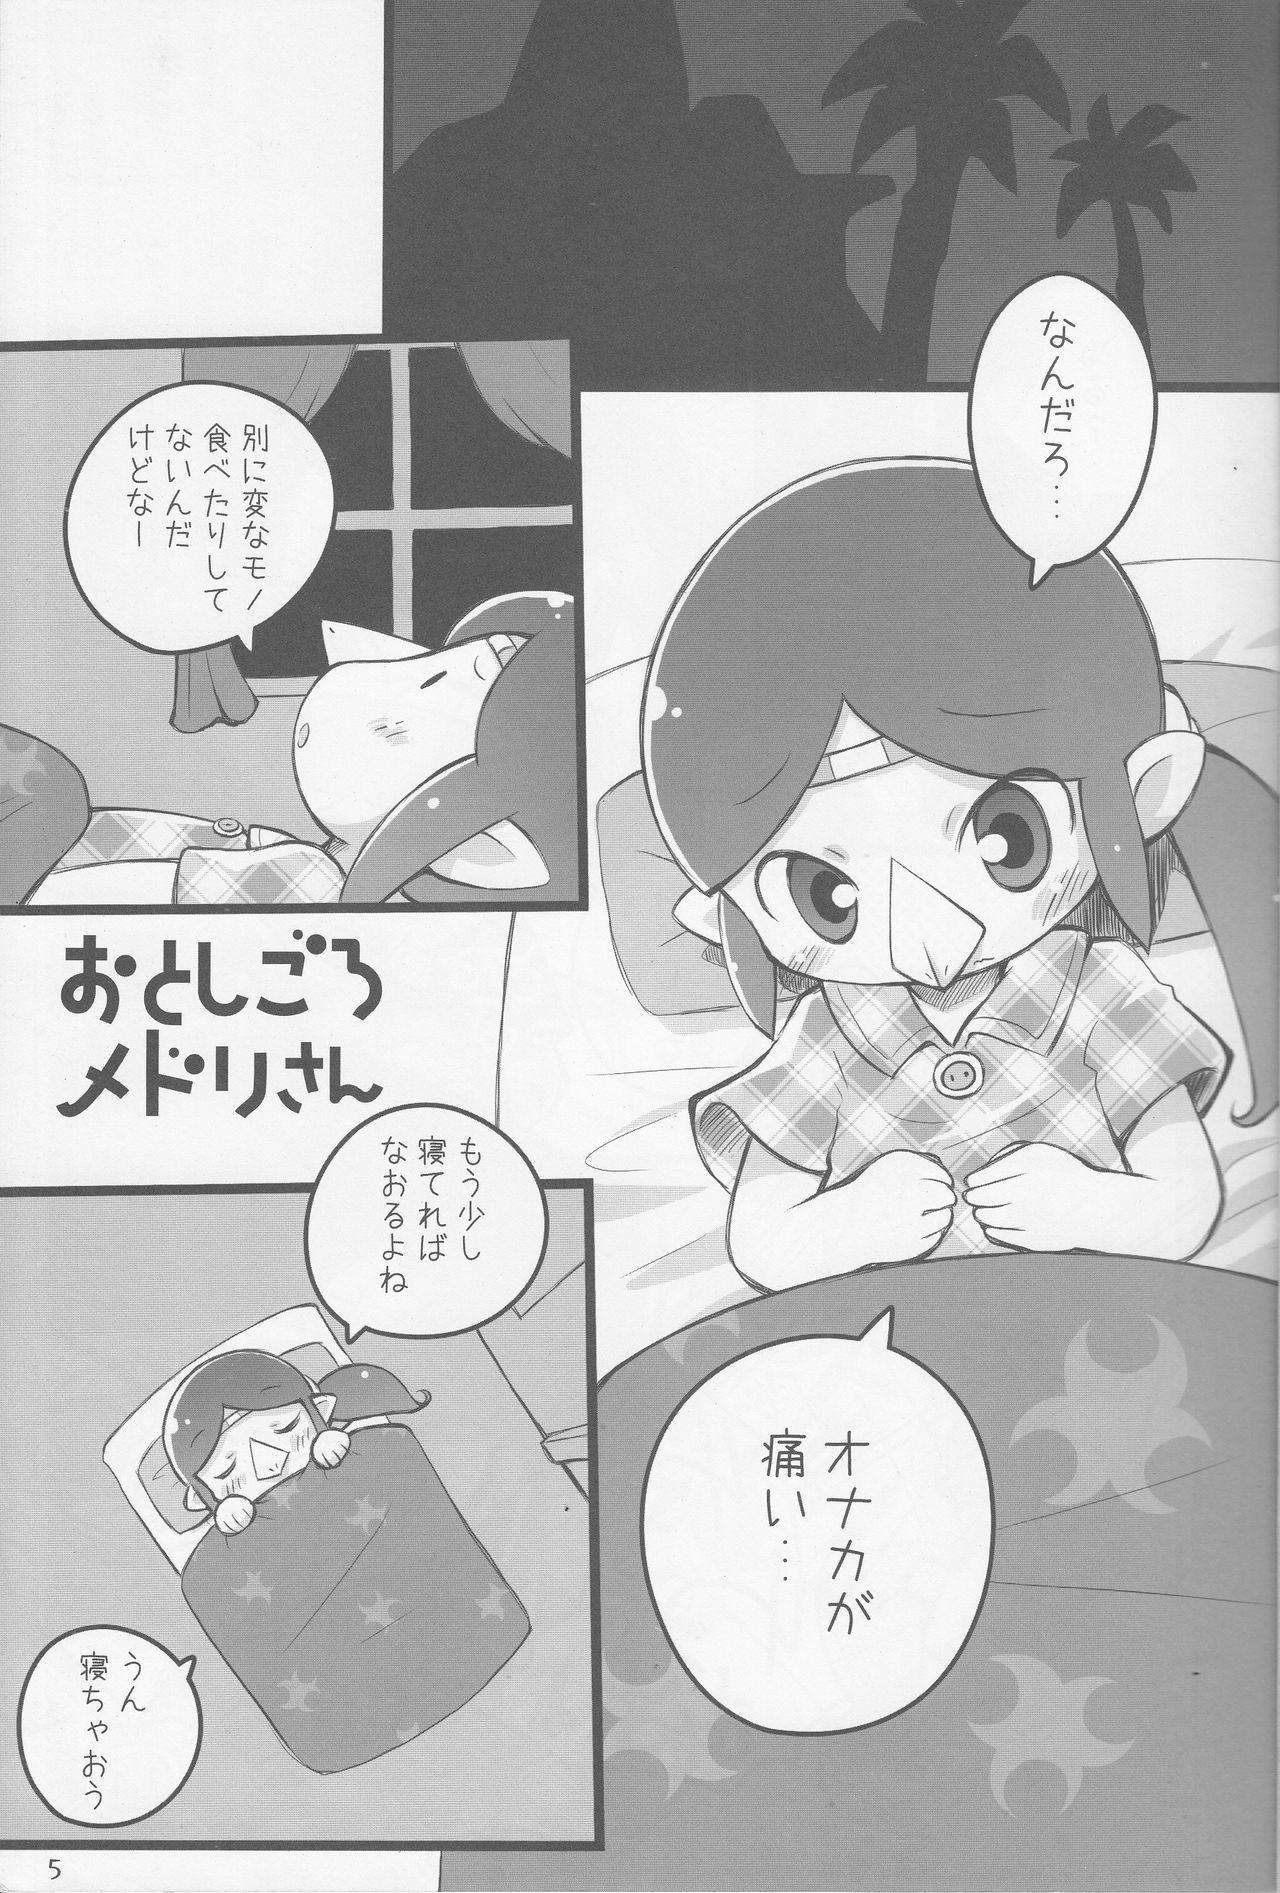 Old Young Medli no Tamago - The legend of zelda Cheating Wife - Page 4